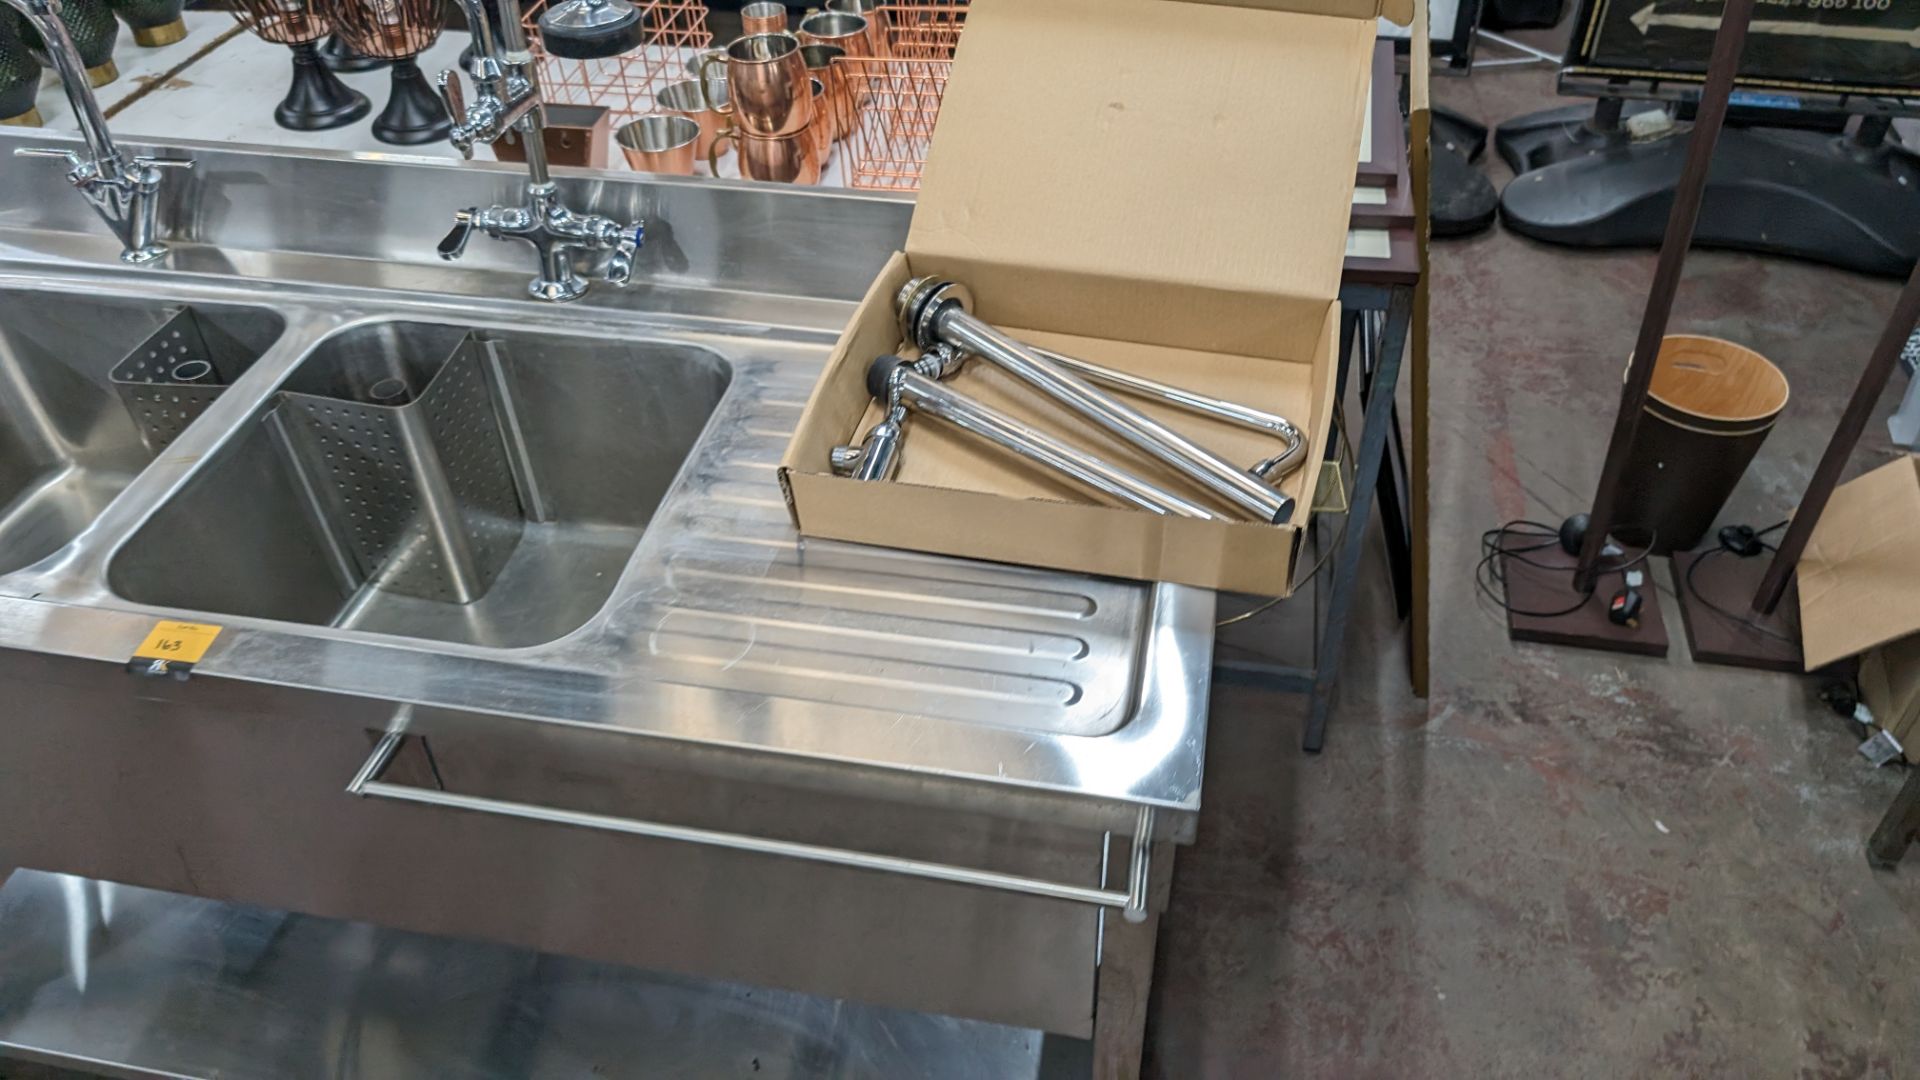 Stainless steel floor standing twin bowl sink arrangement including Monoblock pre-rinse tap system a - Image 5 of 11